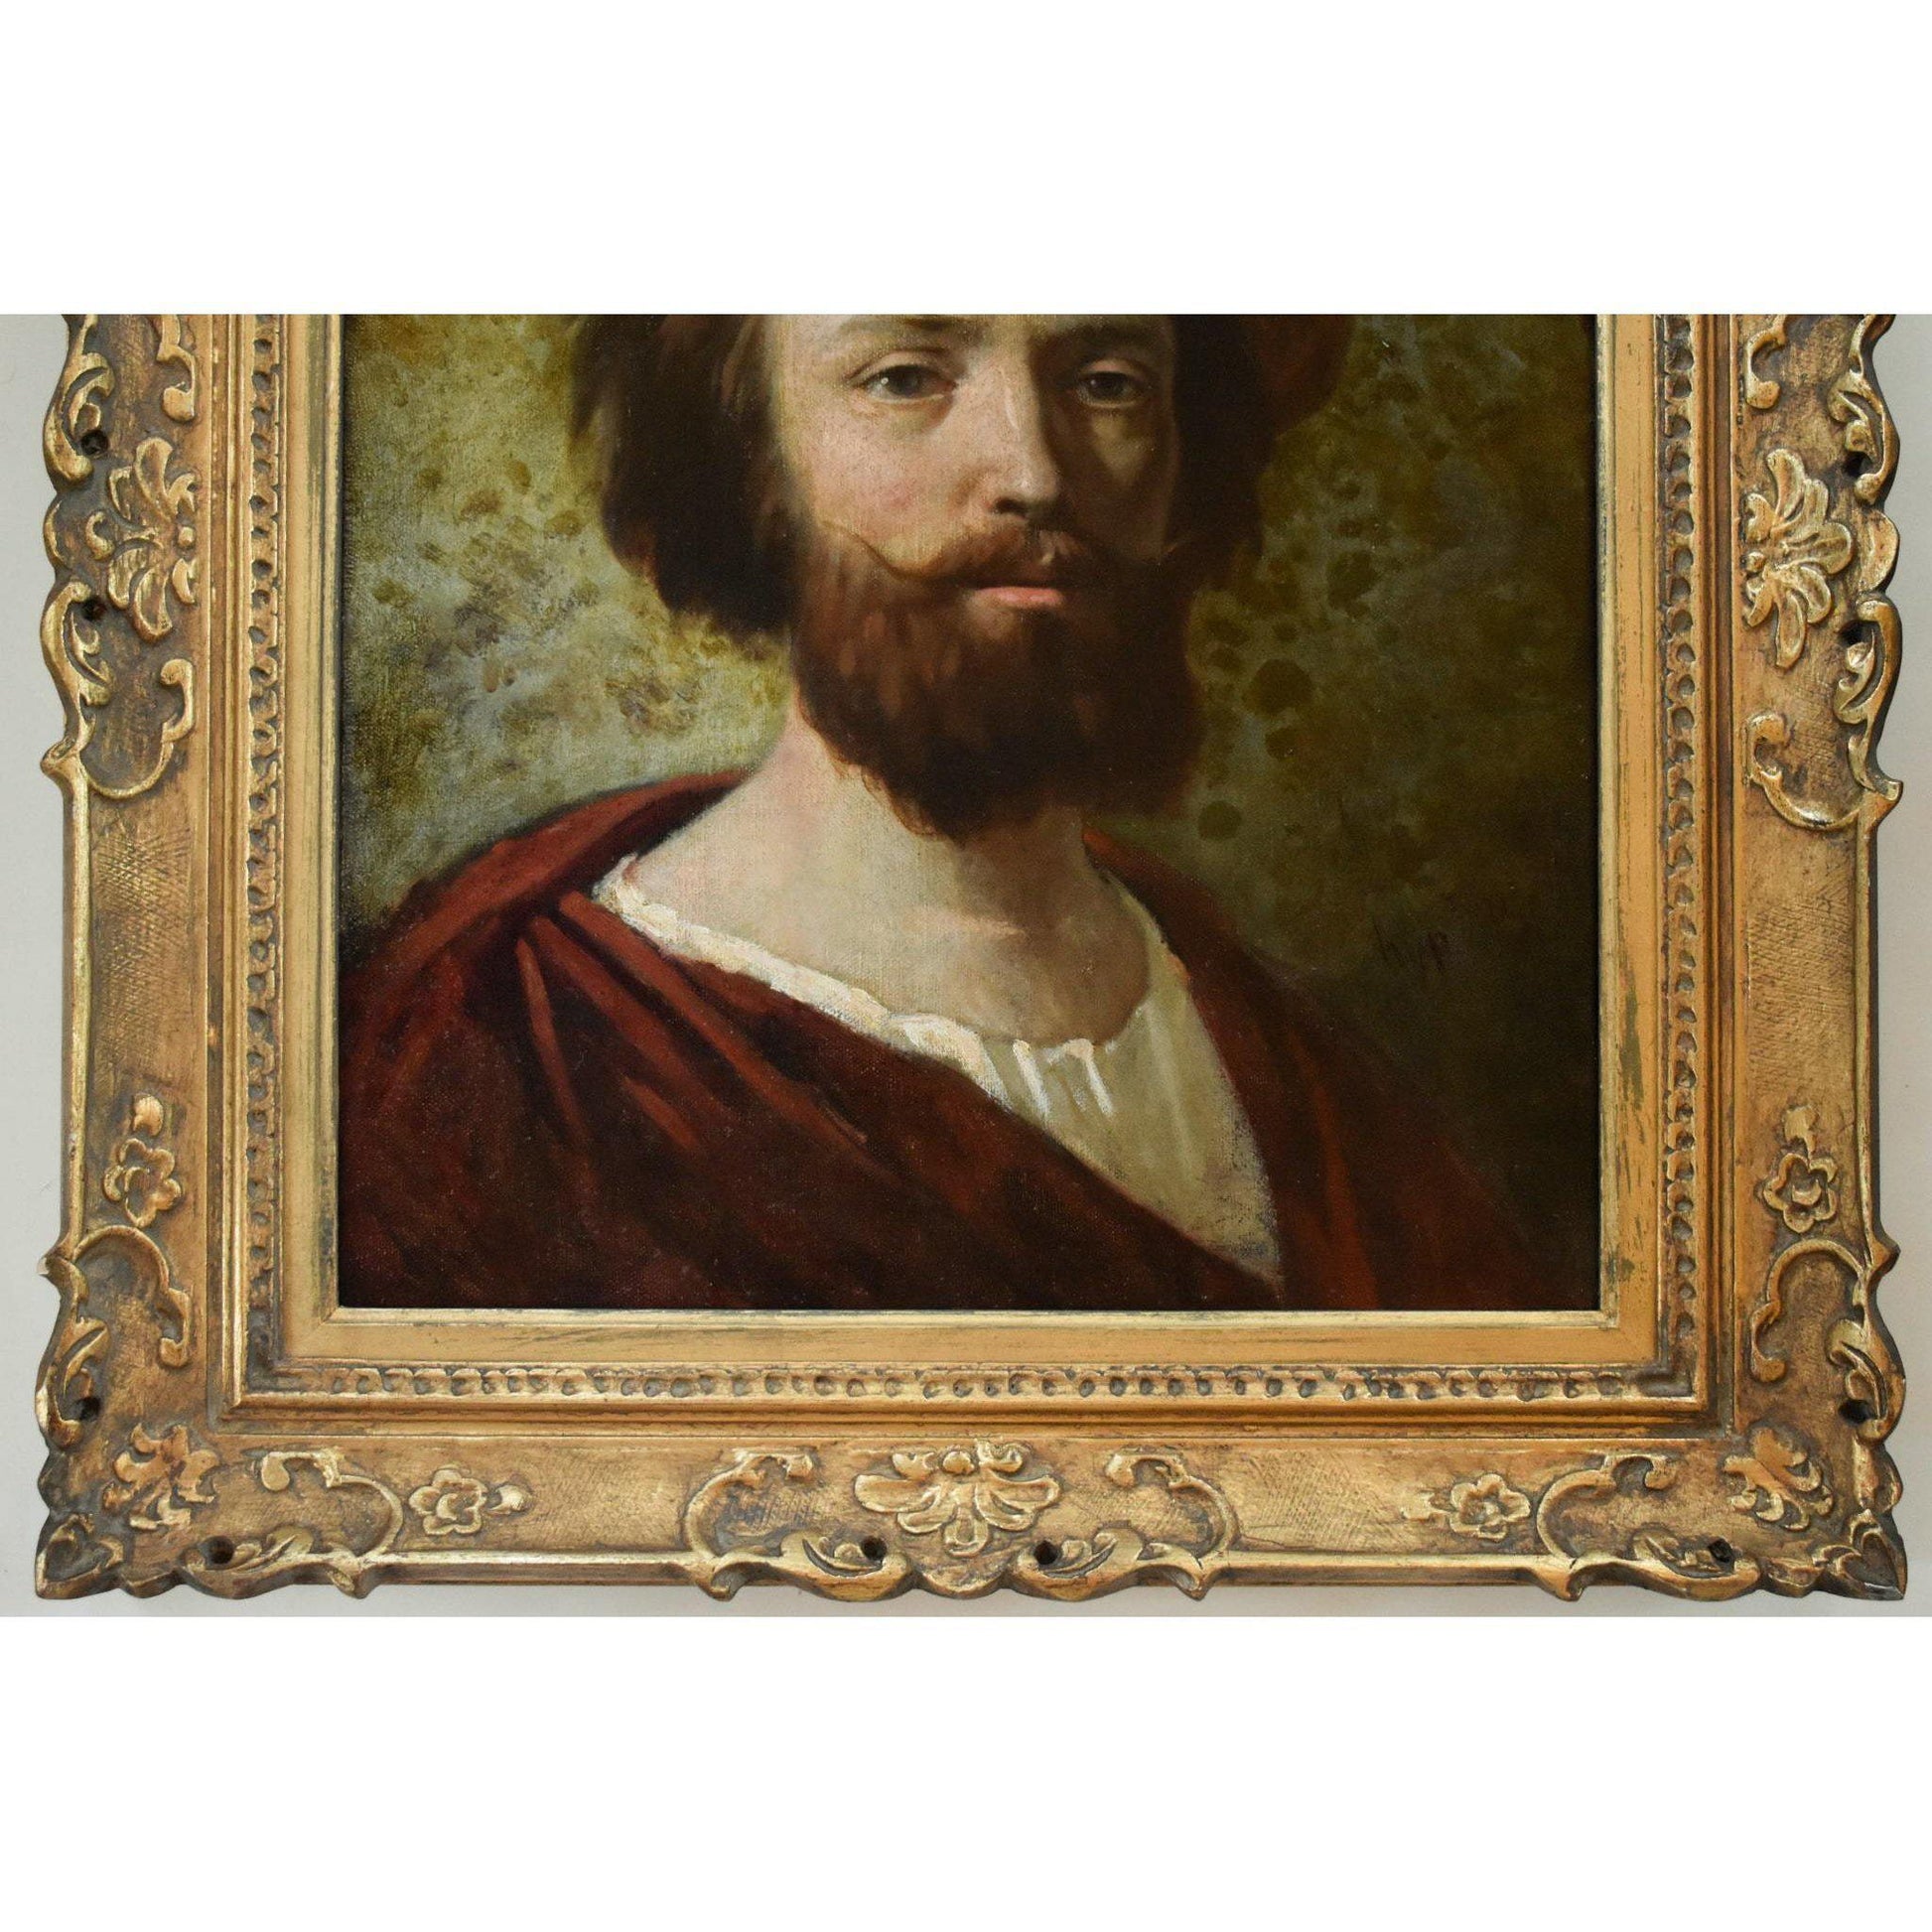 Antique portrait oil painting bearded man medieval clothing 1865 by Hippolyte Bellange for sale at Winckelmann Gallery